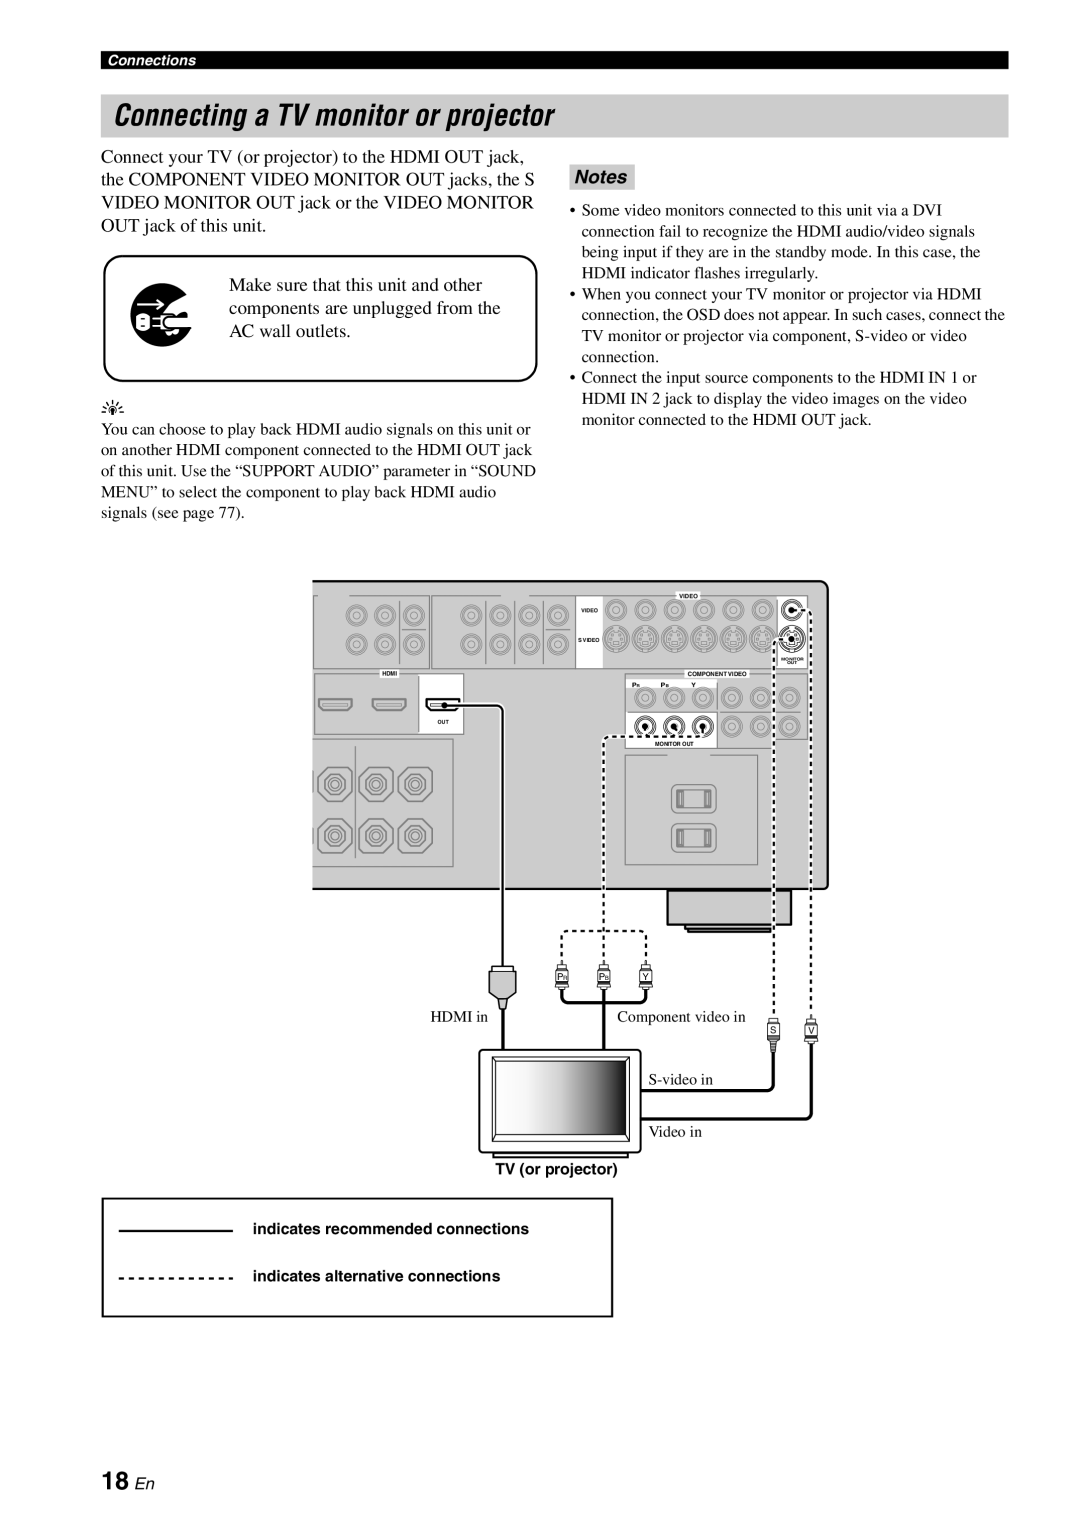 Yamaha HTR-6060 owner manual Connecting a TV monitor or projector, 18 En, Notes 